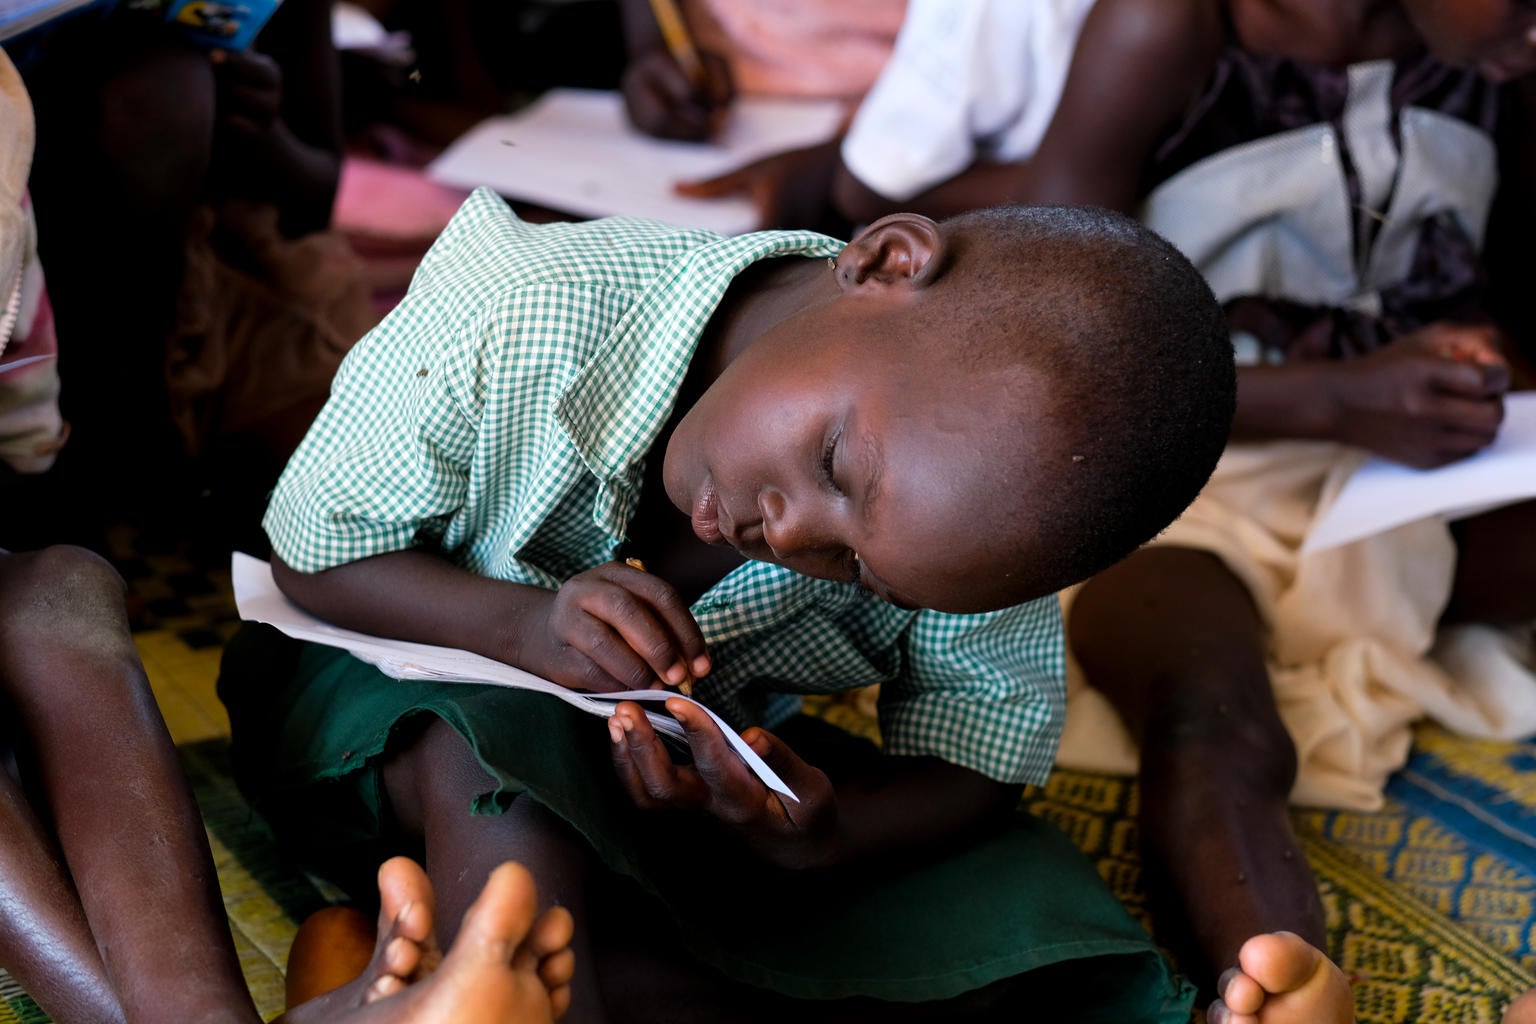 On 26 April 2018 in South Sudan, a student does classwork in Rock City Primary School in Juba, the capital.